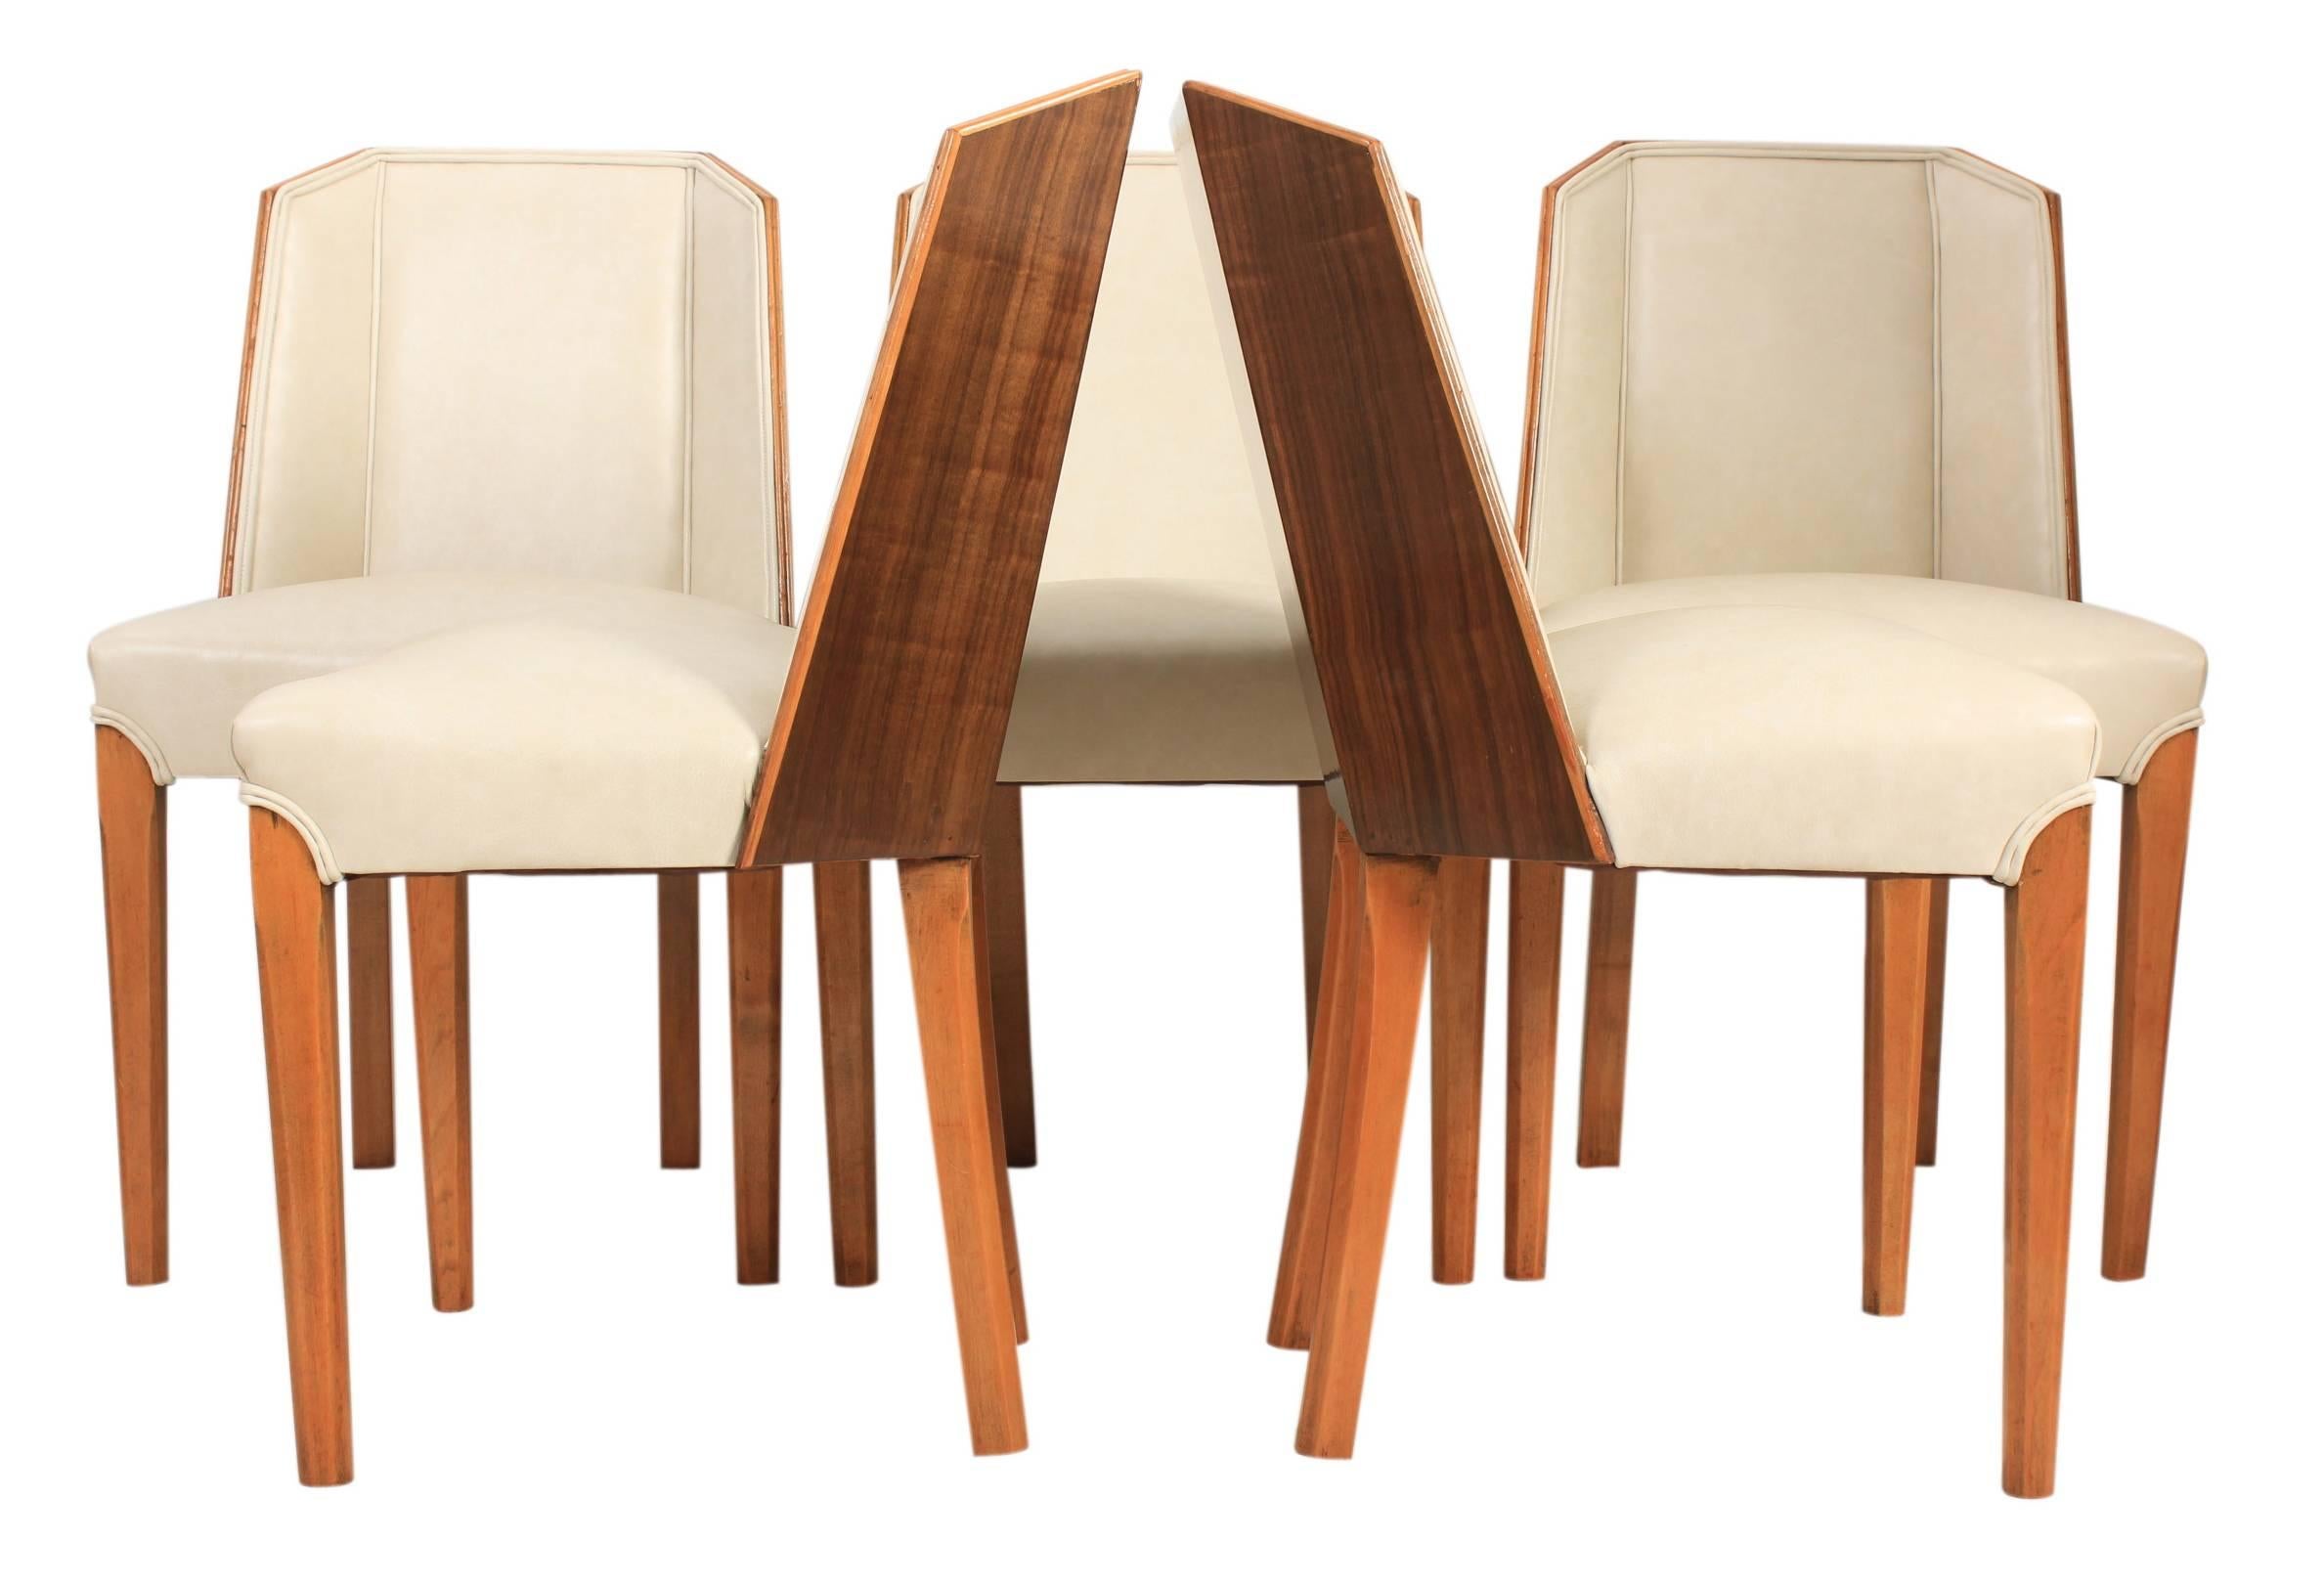 English, circa 1930.
These Art Deco dining chairs are in superb showroom condition.
Boasting fantastic walnut backs and professionally upholstered cream leather seats with double piped edging.
On square tapered legs.

Measures: W 52cm/20.5